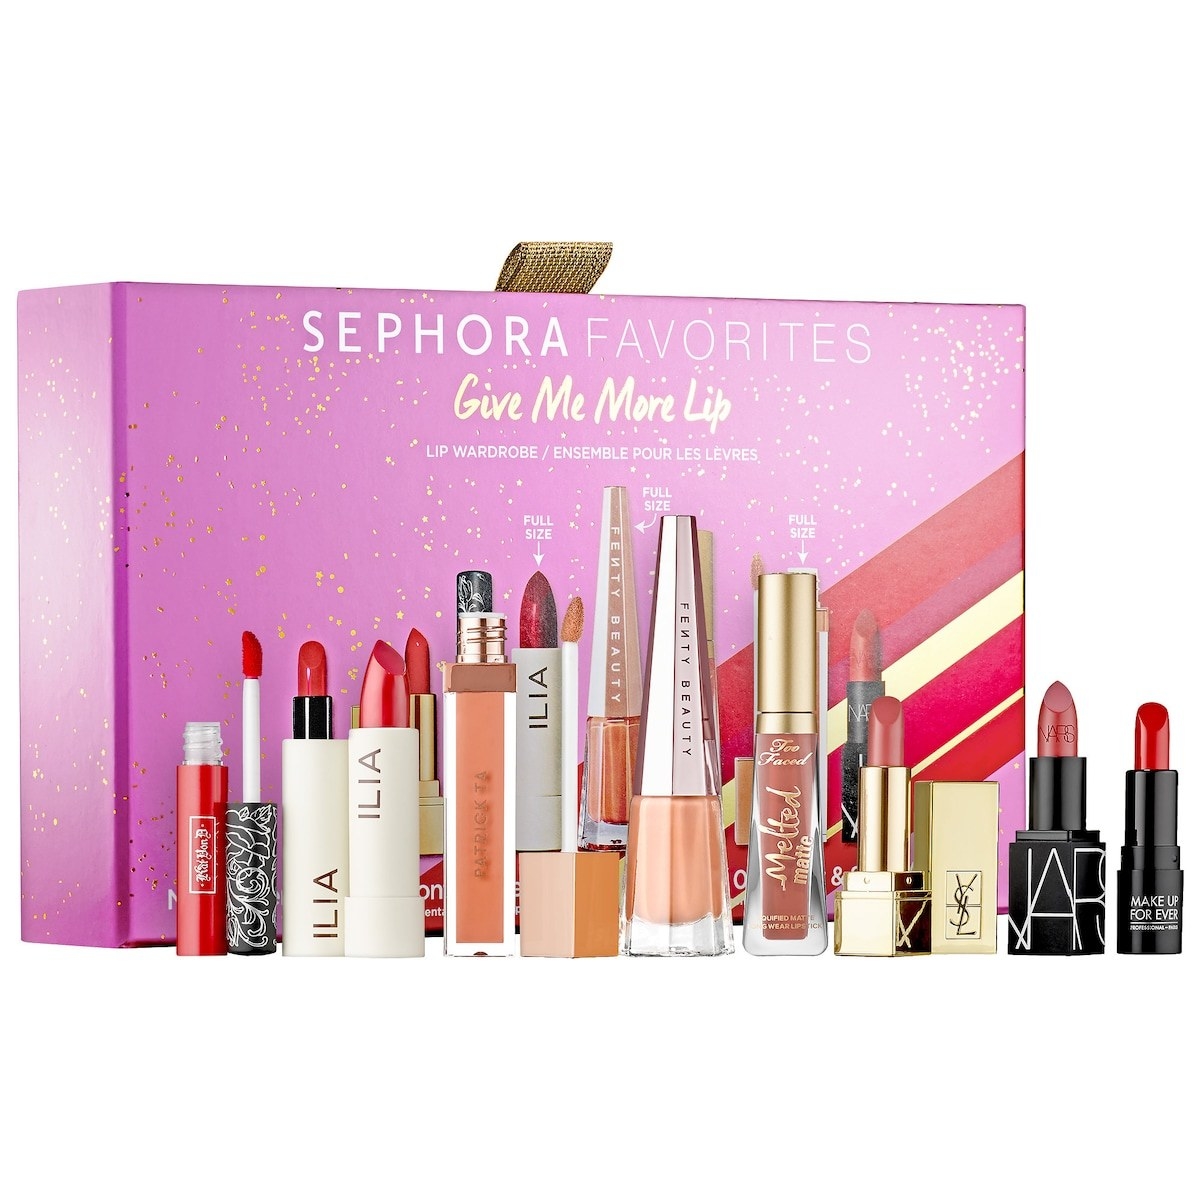 The lipstick set with gift box